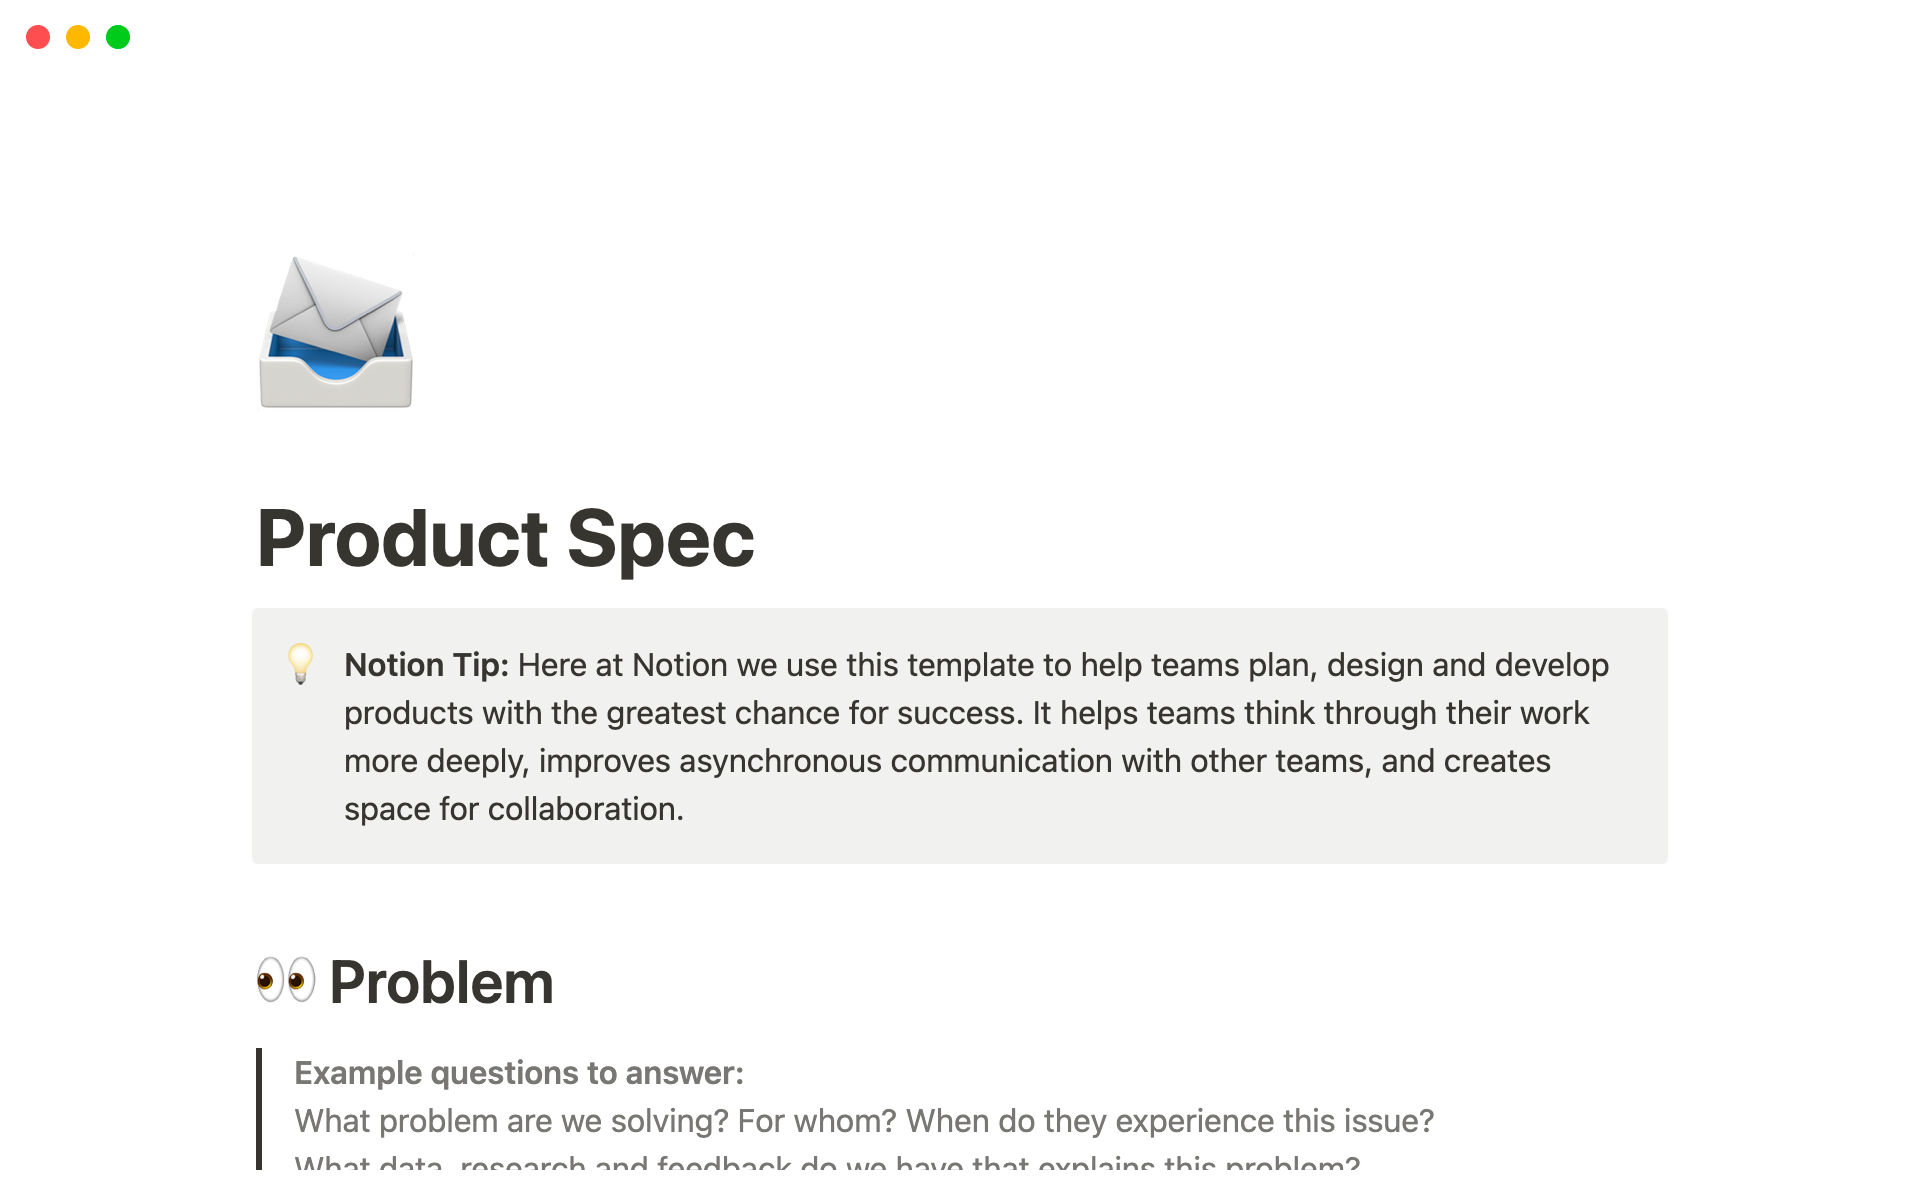 Screenshot of Best 10 PRD: Product Requirements Doc Templates for Product Designers collection by Notion